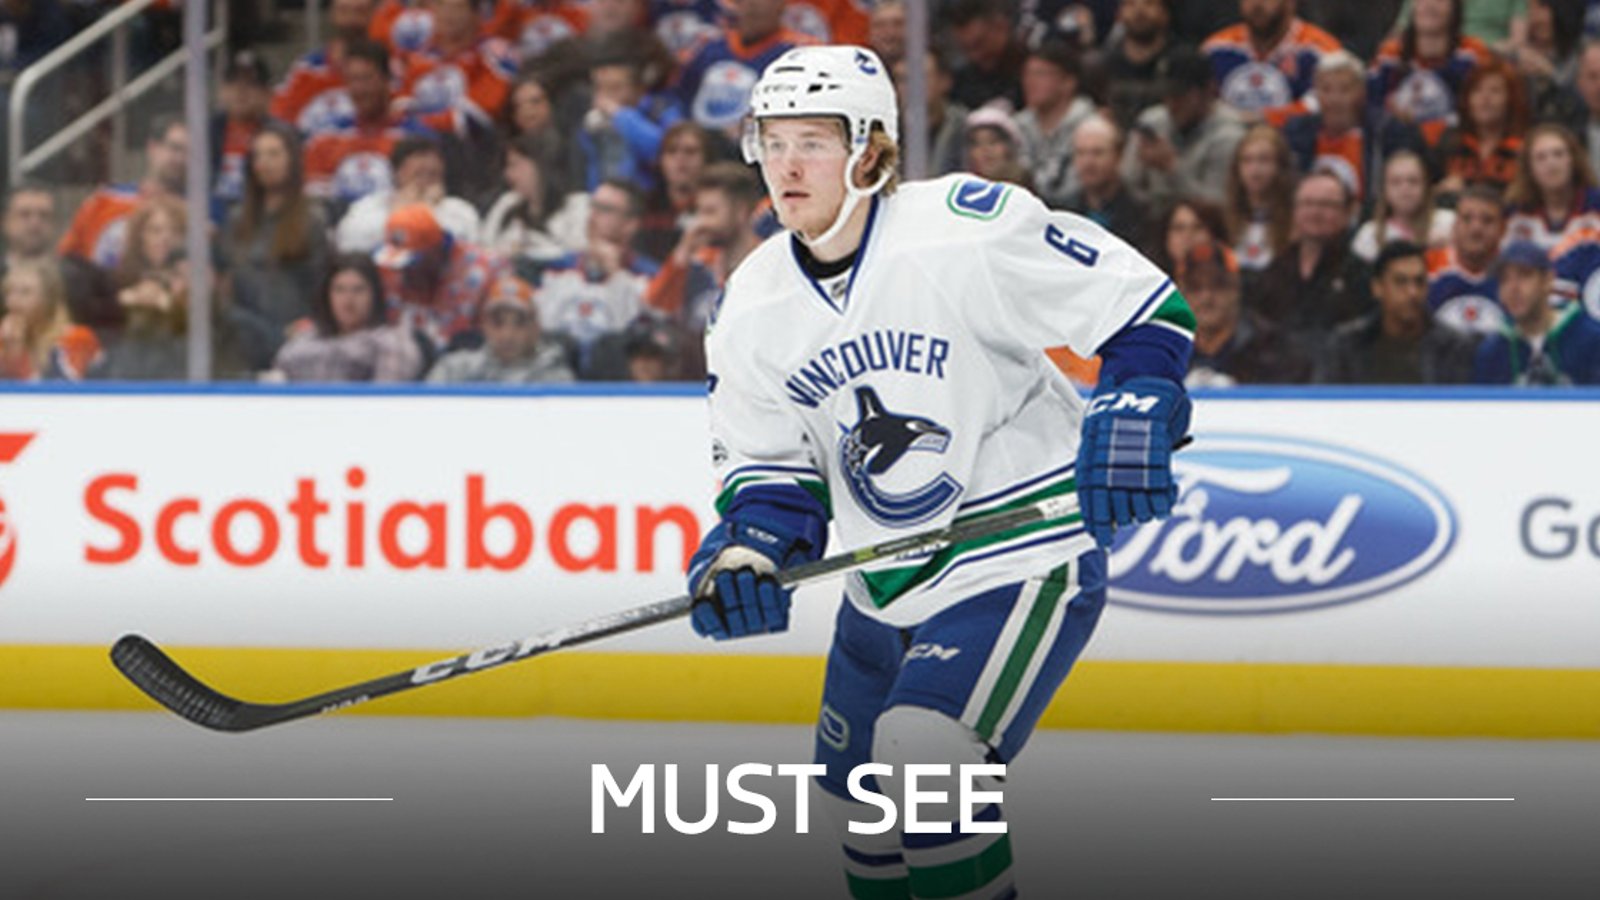 Must see: Brock Boeser snipes one past Michael Neuvirth